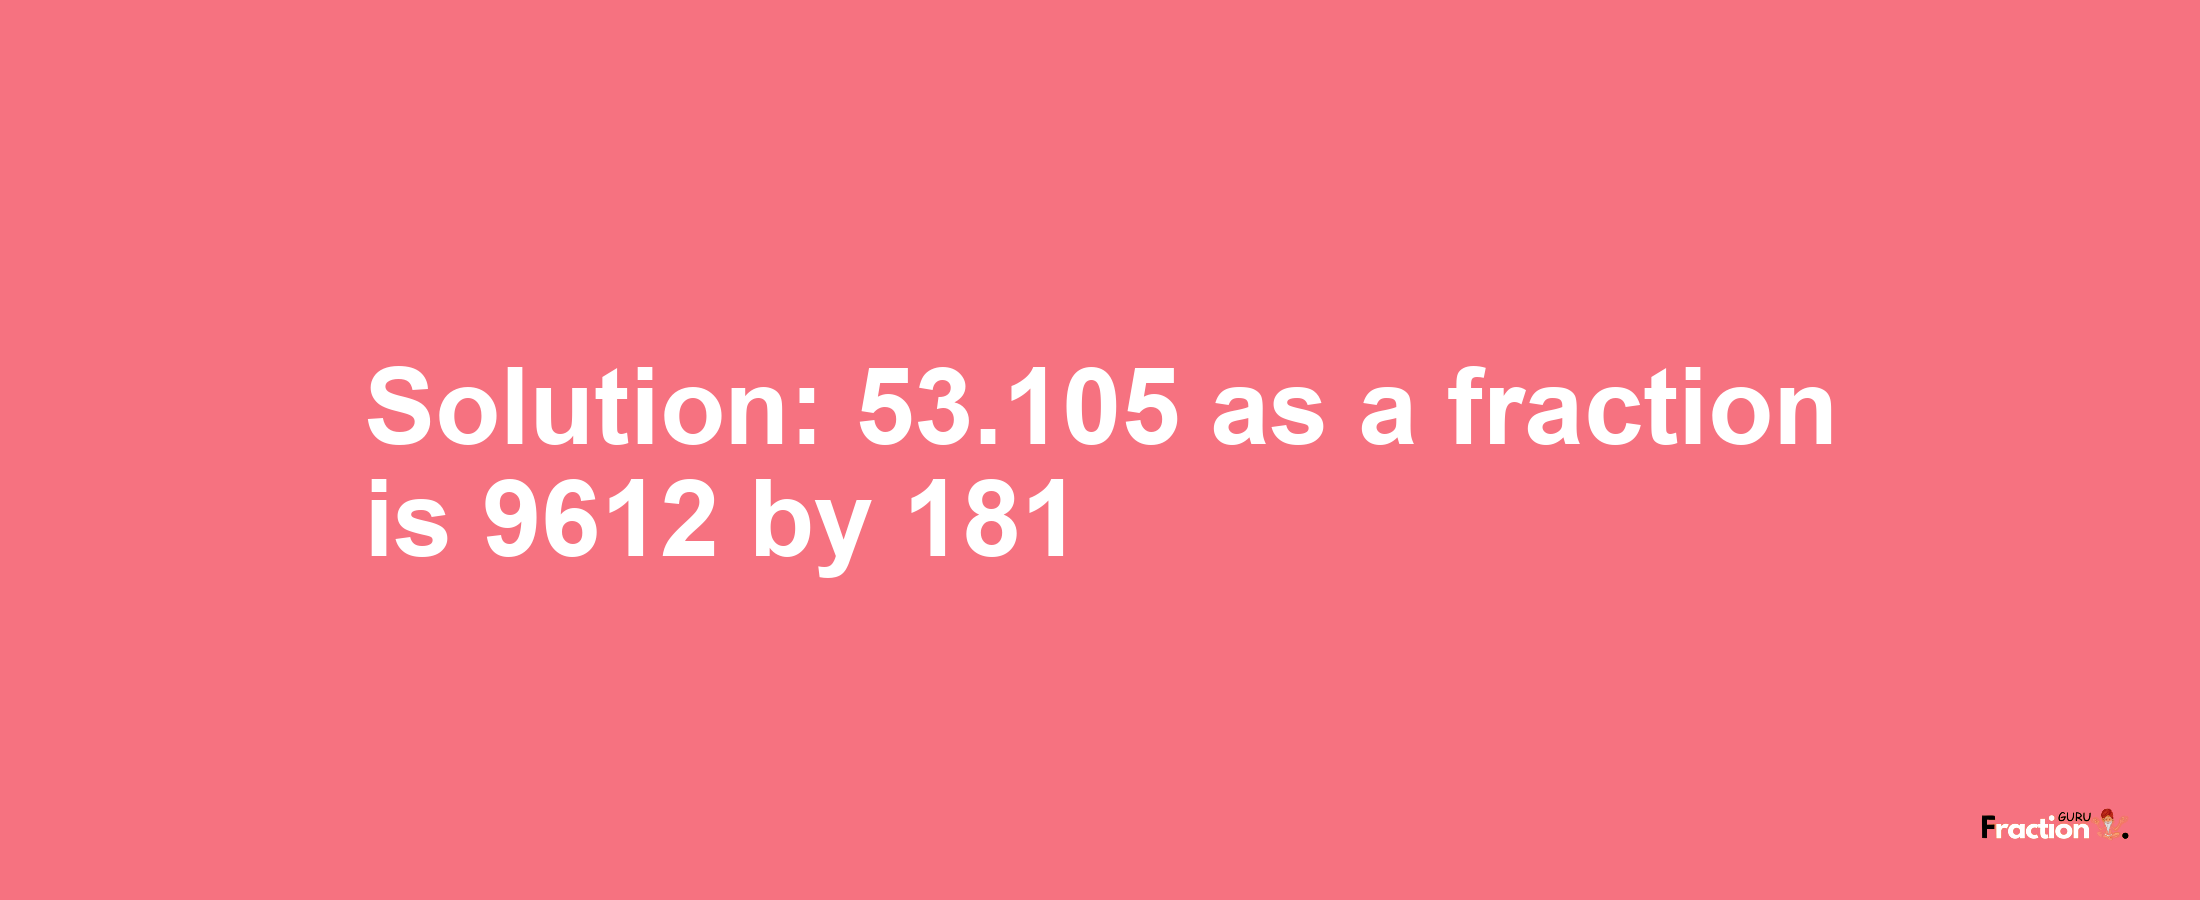 Solution:53.105 as a fraction is 9612/181